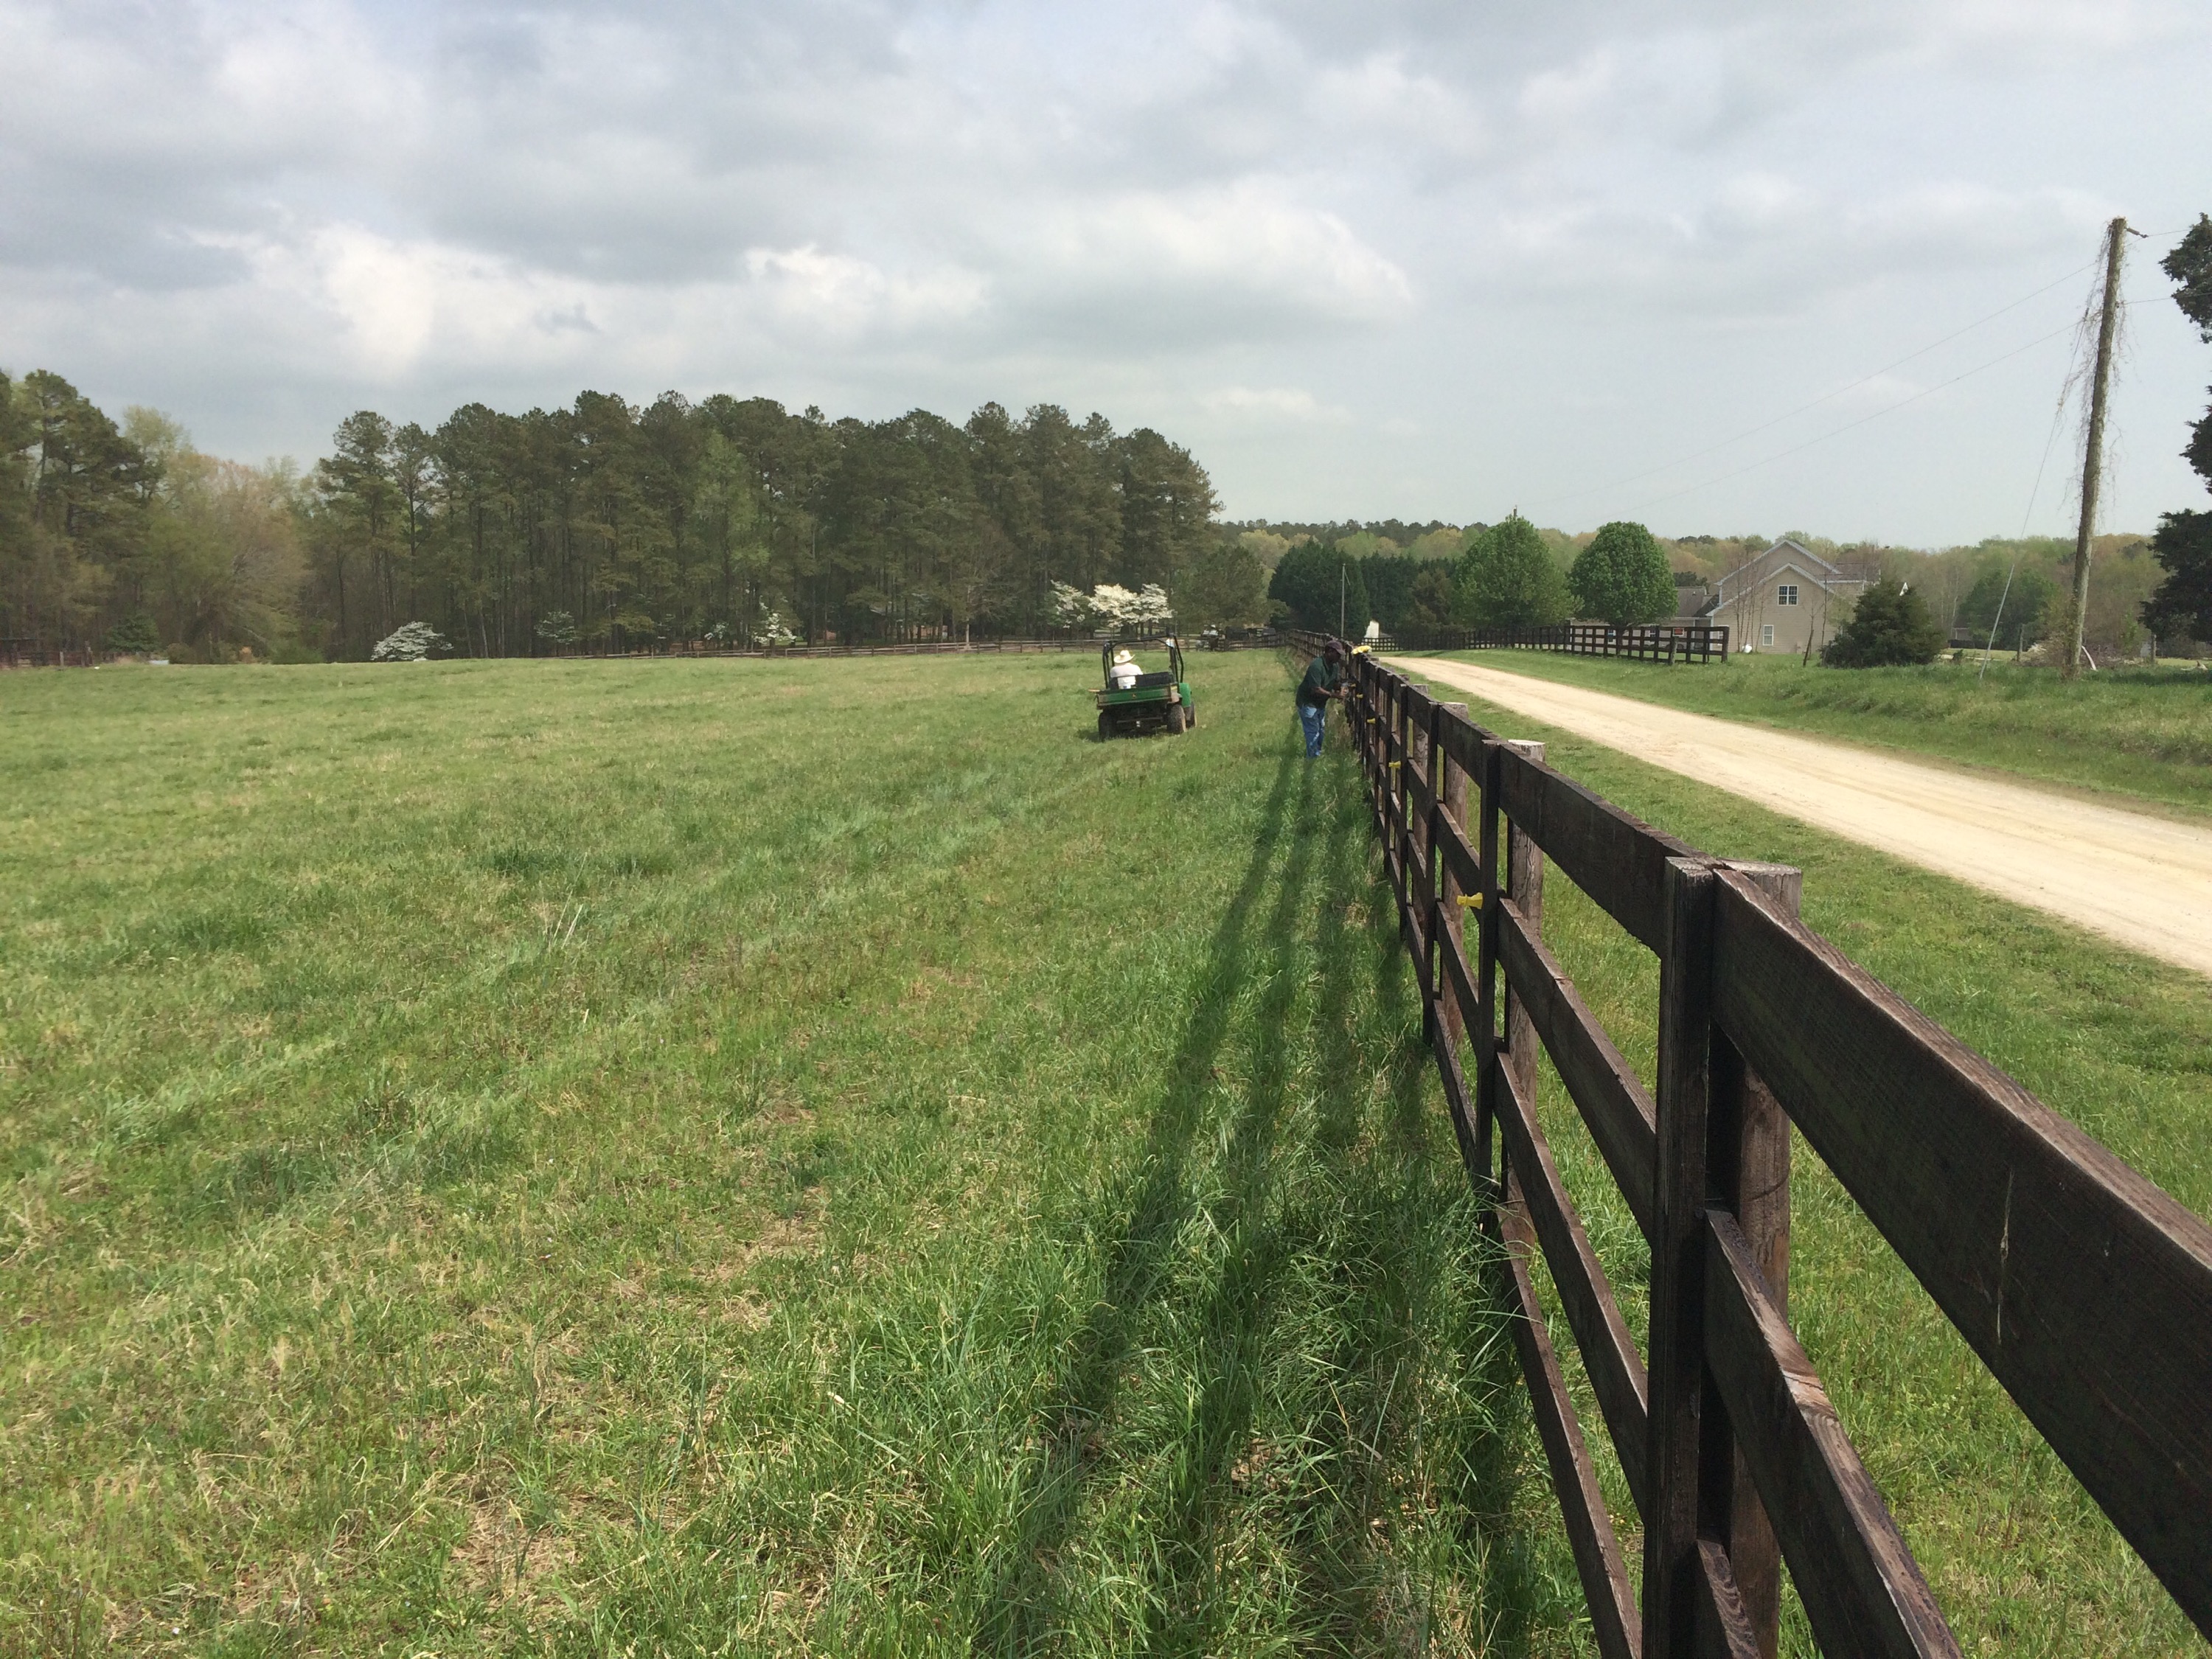 Working on pasture fencing